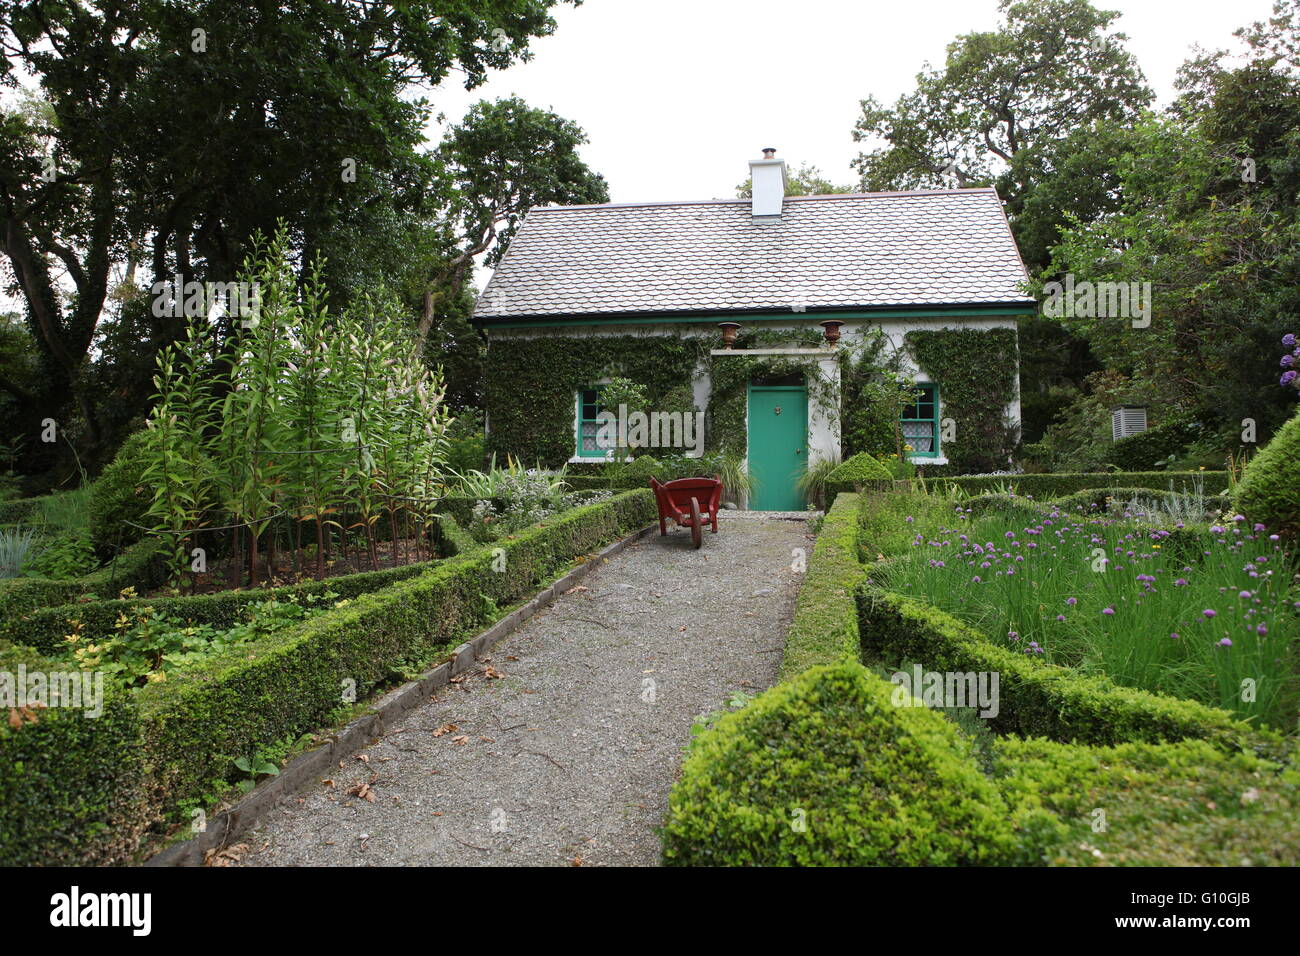 The Gardeners cottage, Glenveagh National Park, Donegal, Ireland Stock Photo